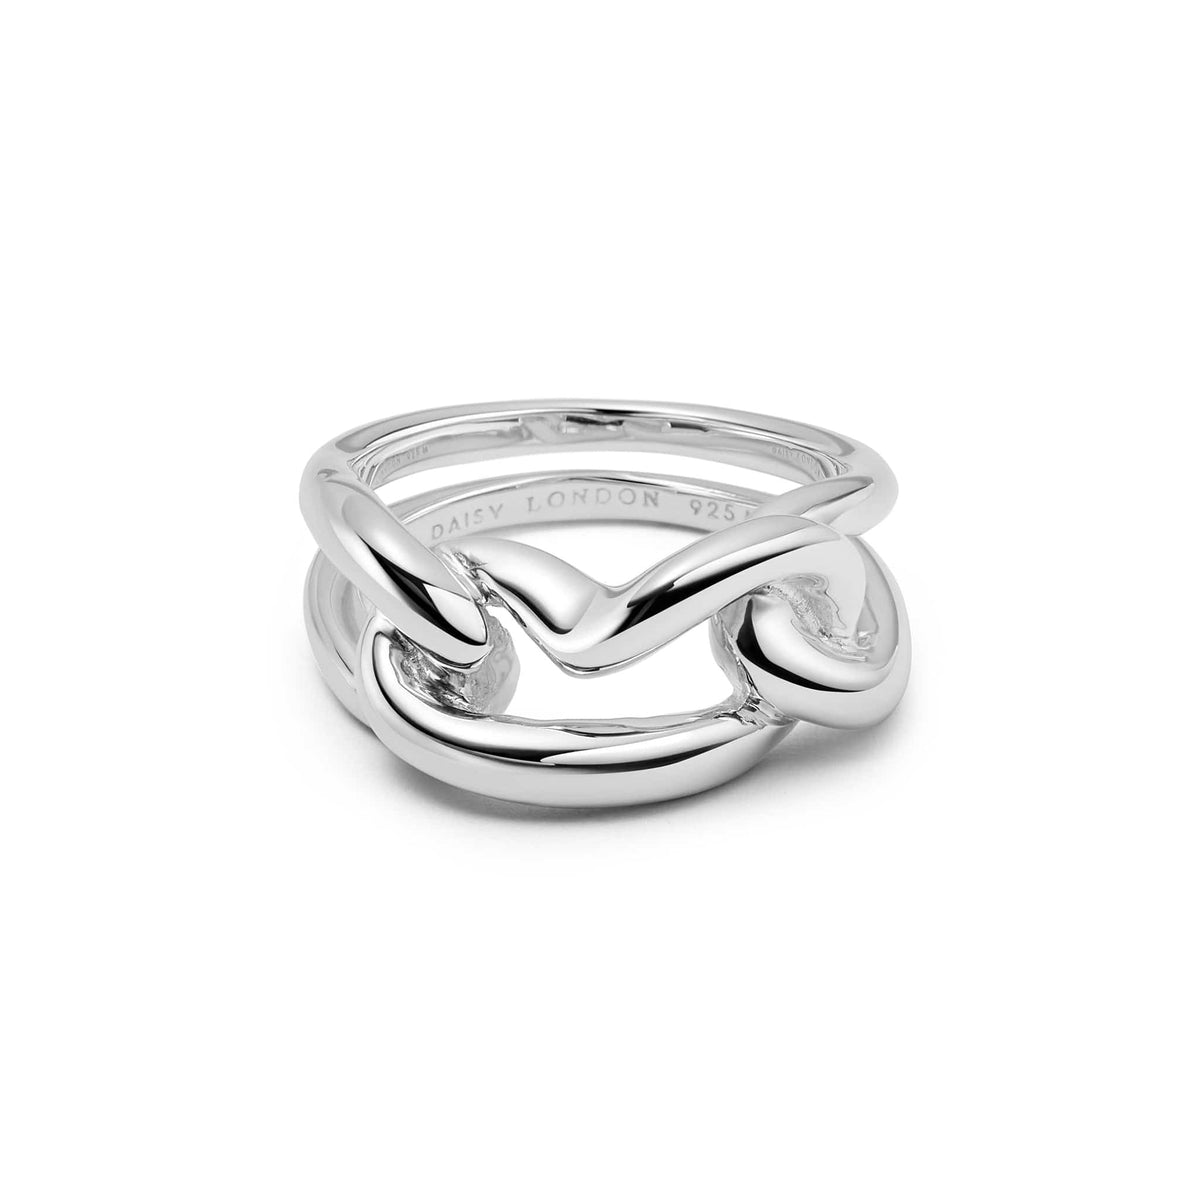 Polly Sayer Large Knot Chain Ring Sterling Silver – Daisy London